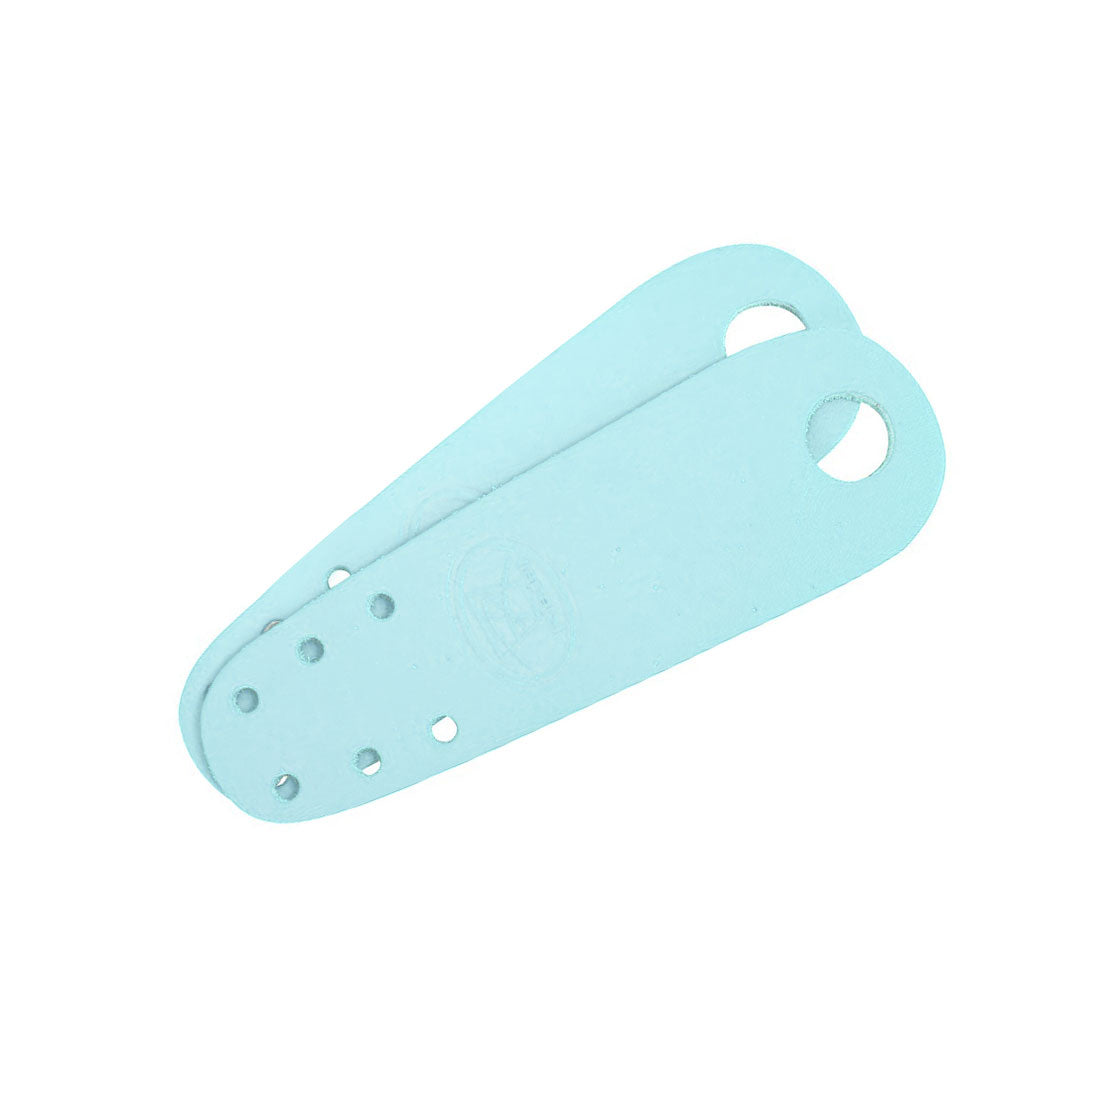 Riedell Flat Toe Guards 2pk - Leather Baby Blue Roller Skate Hardware and Parts